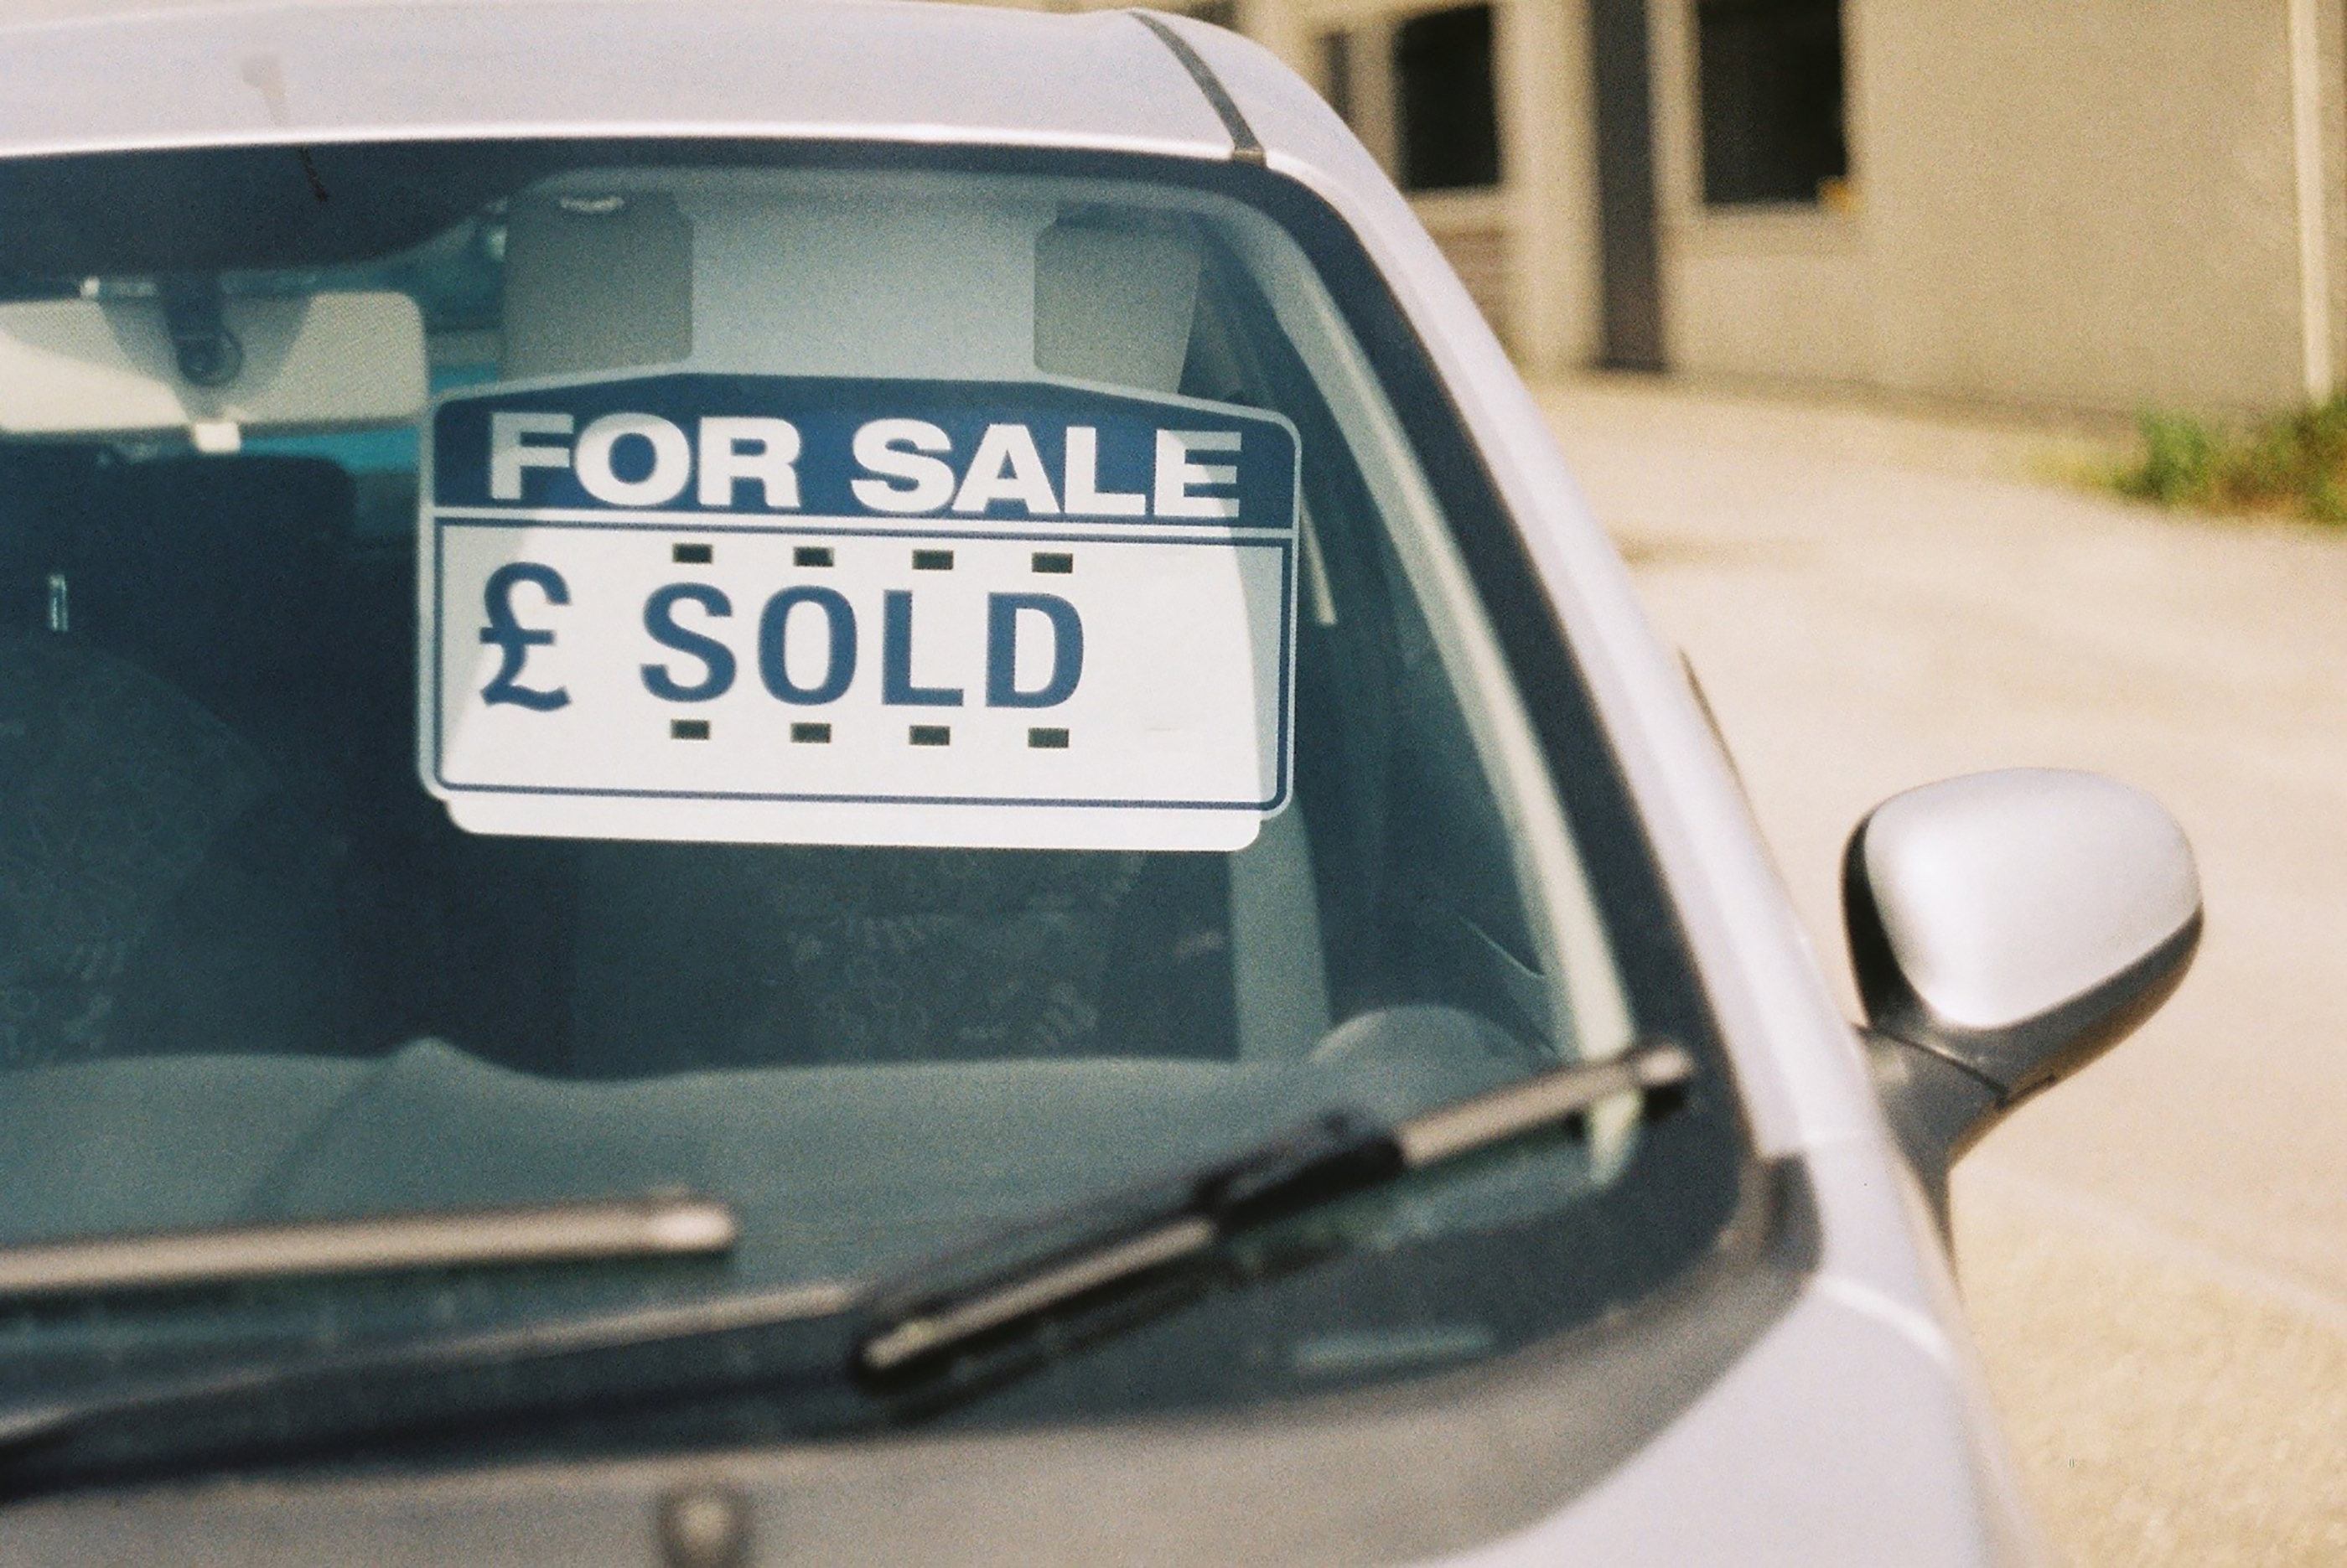 Car buyers can dramatically cut costs by looking at the end of the month